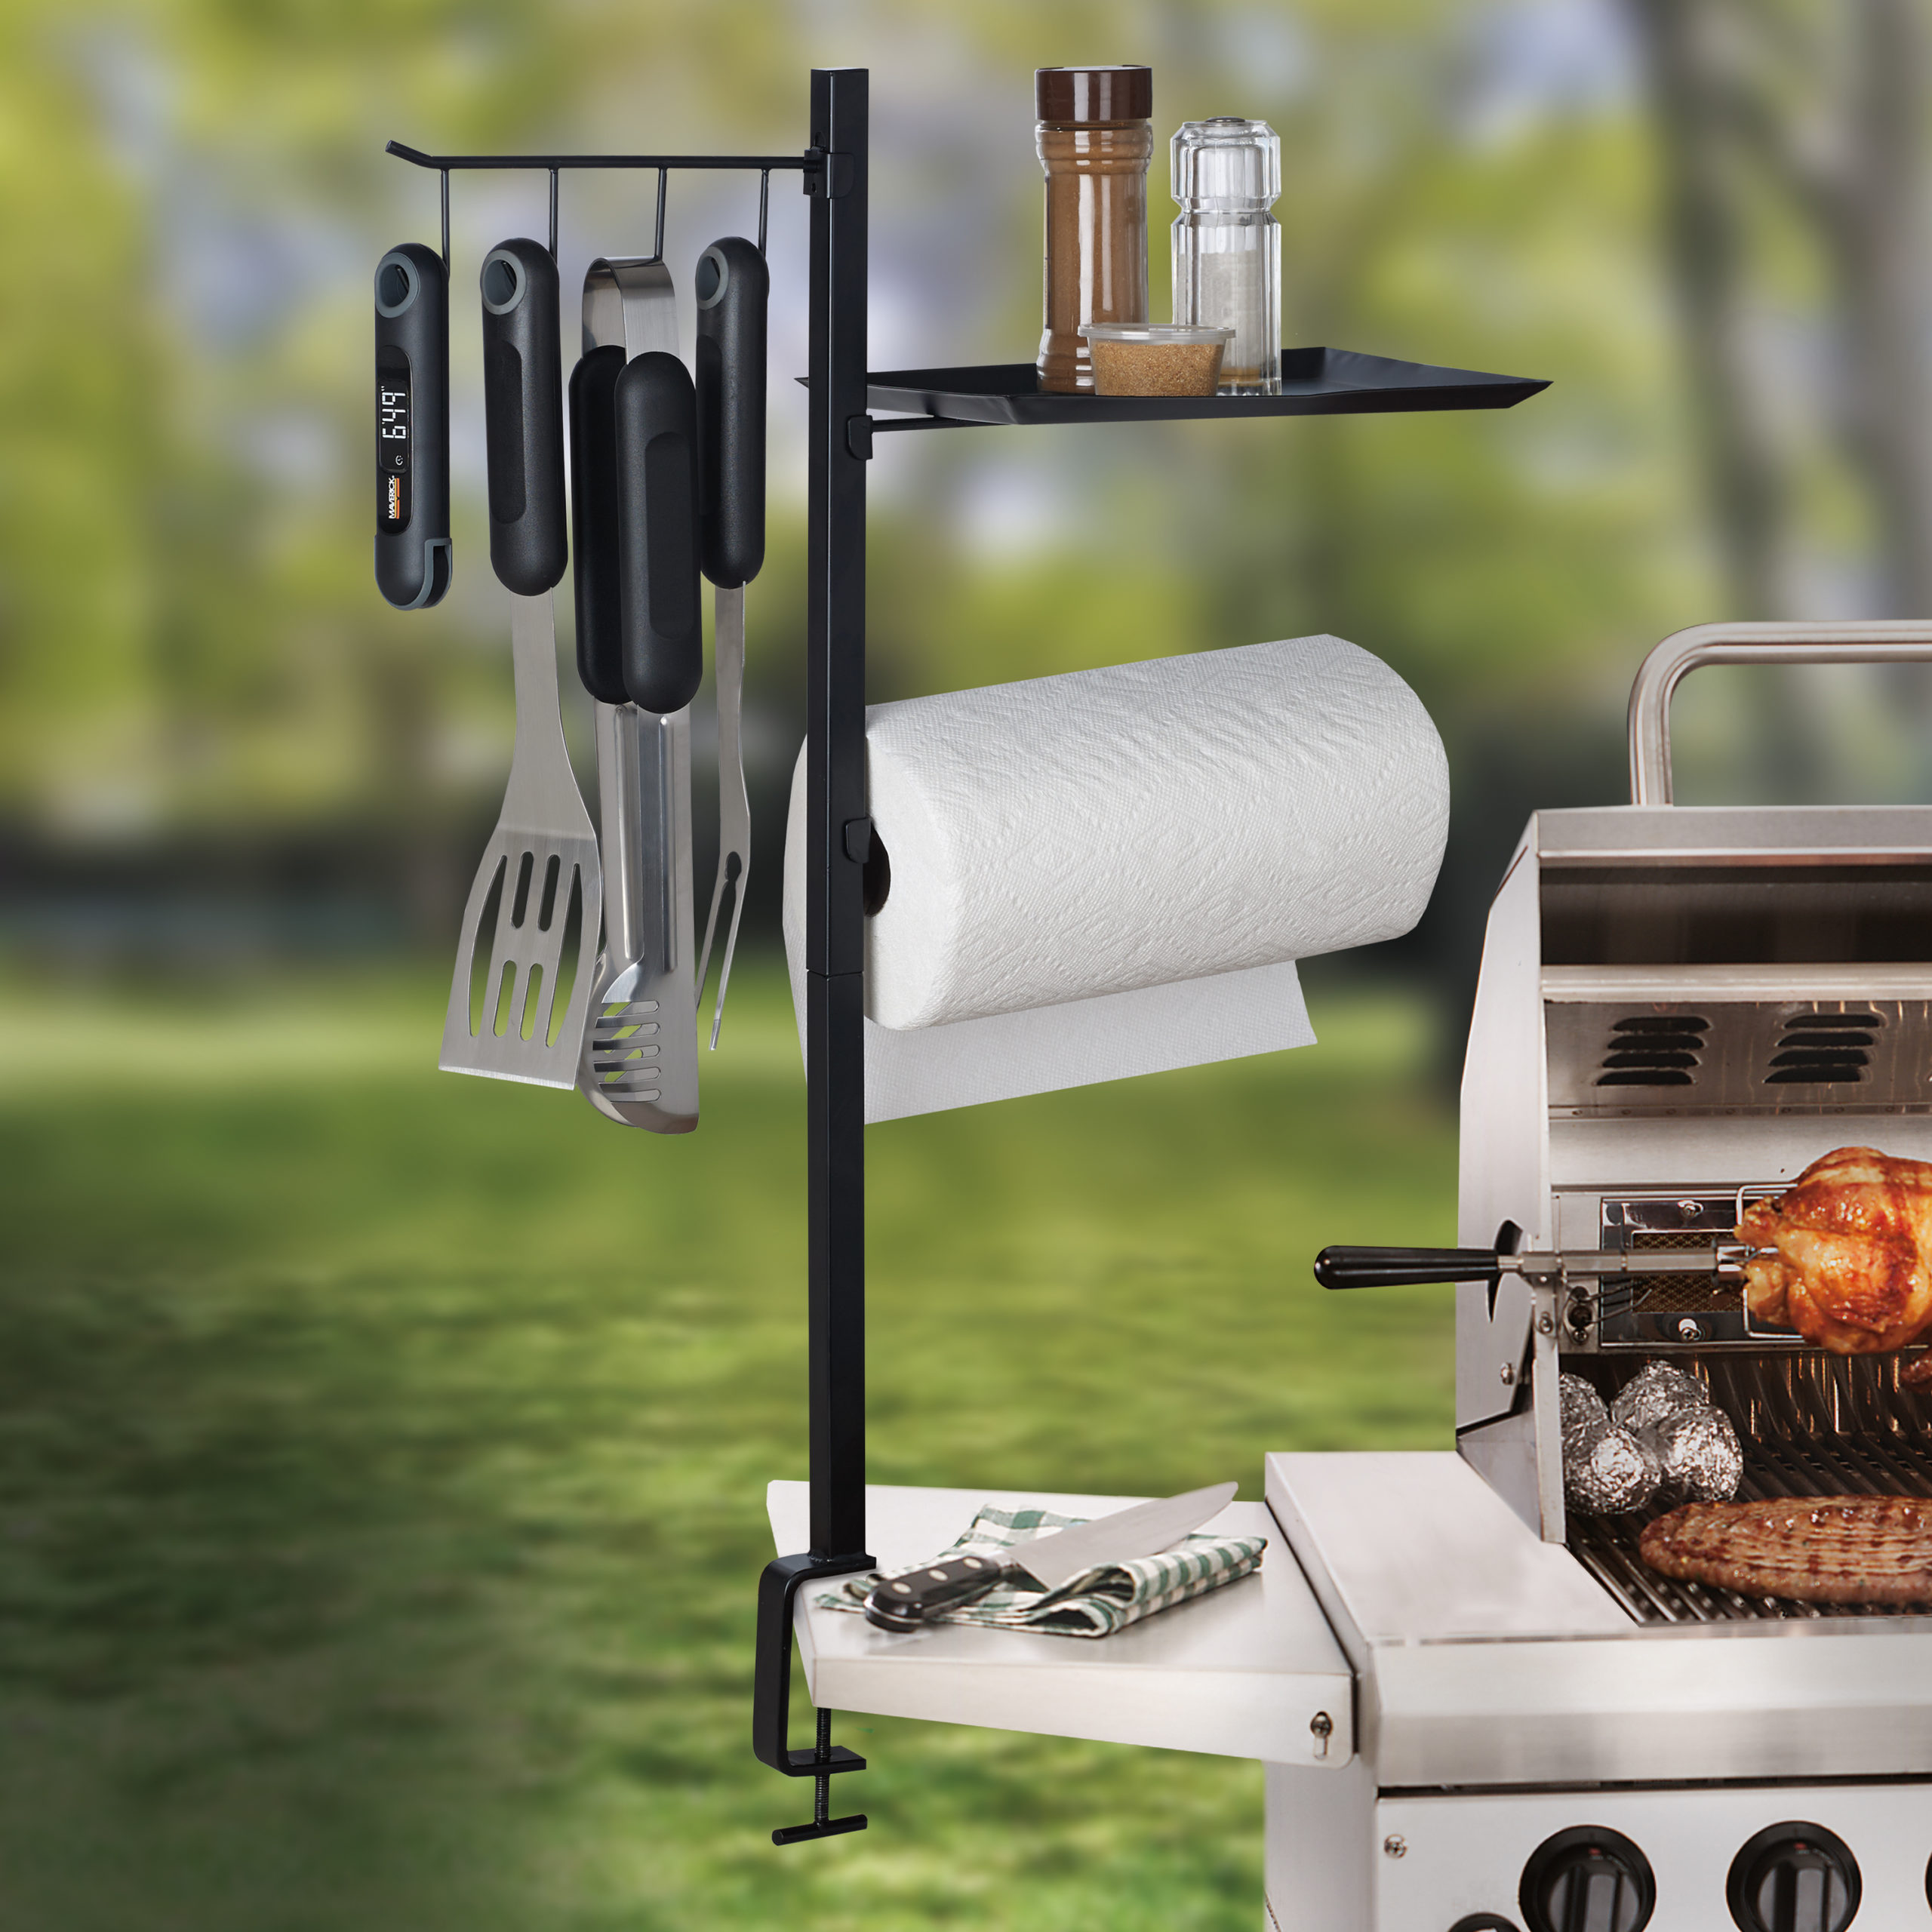 Barbecue Grilling Accessories